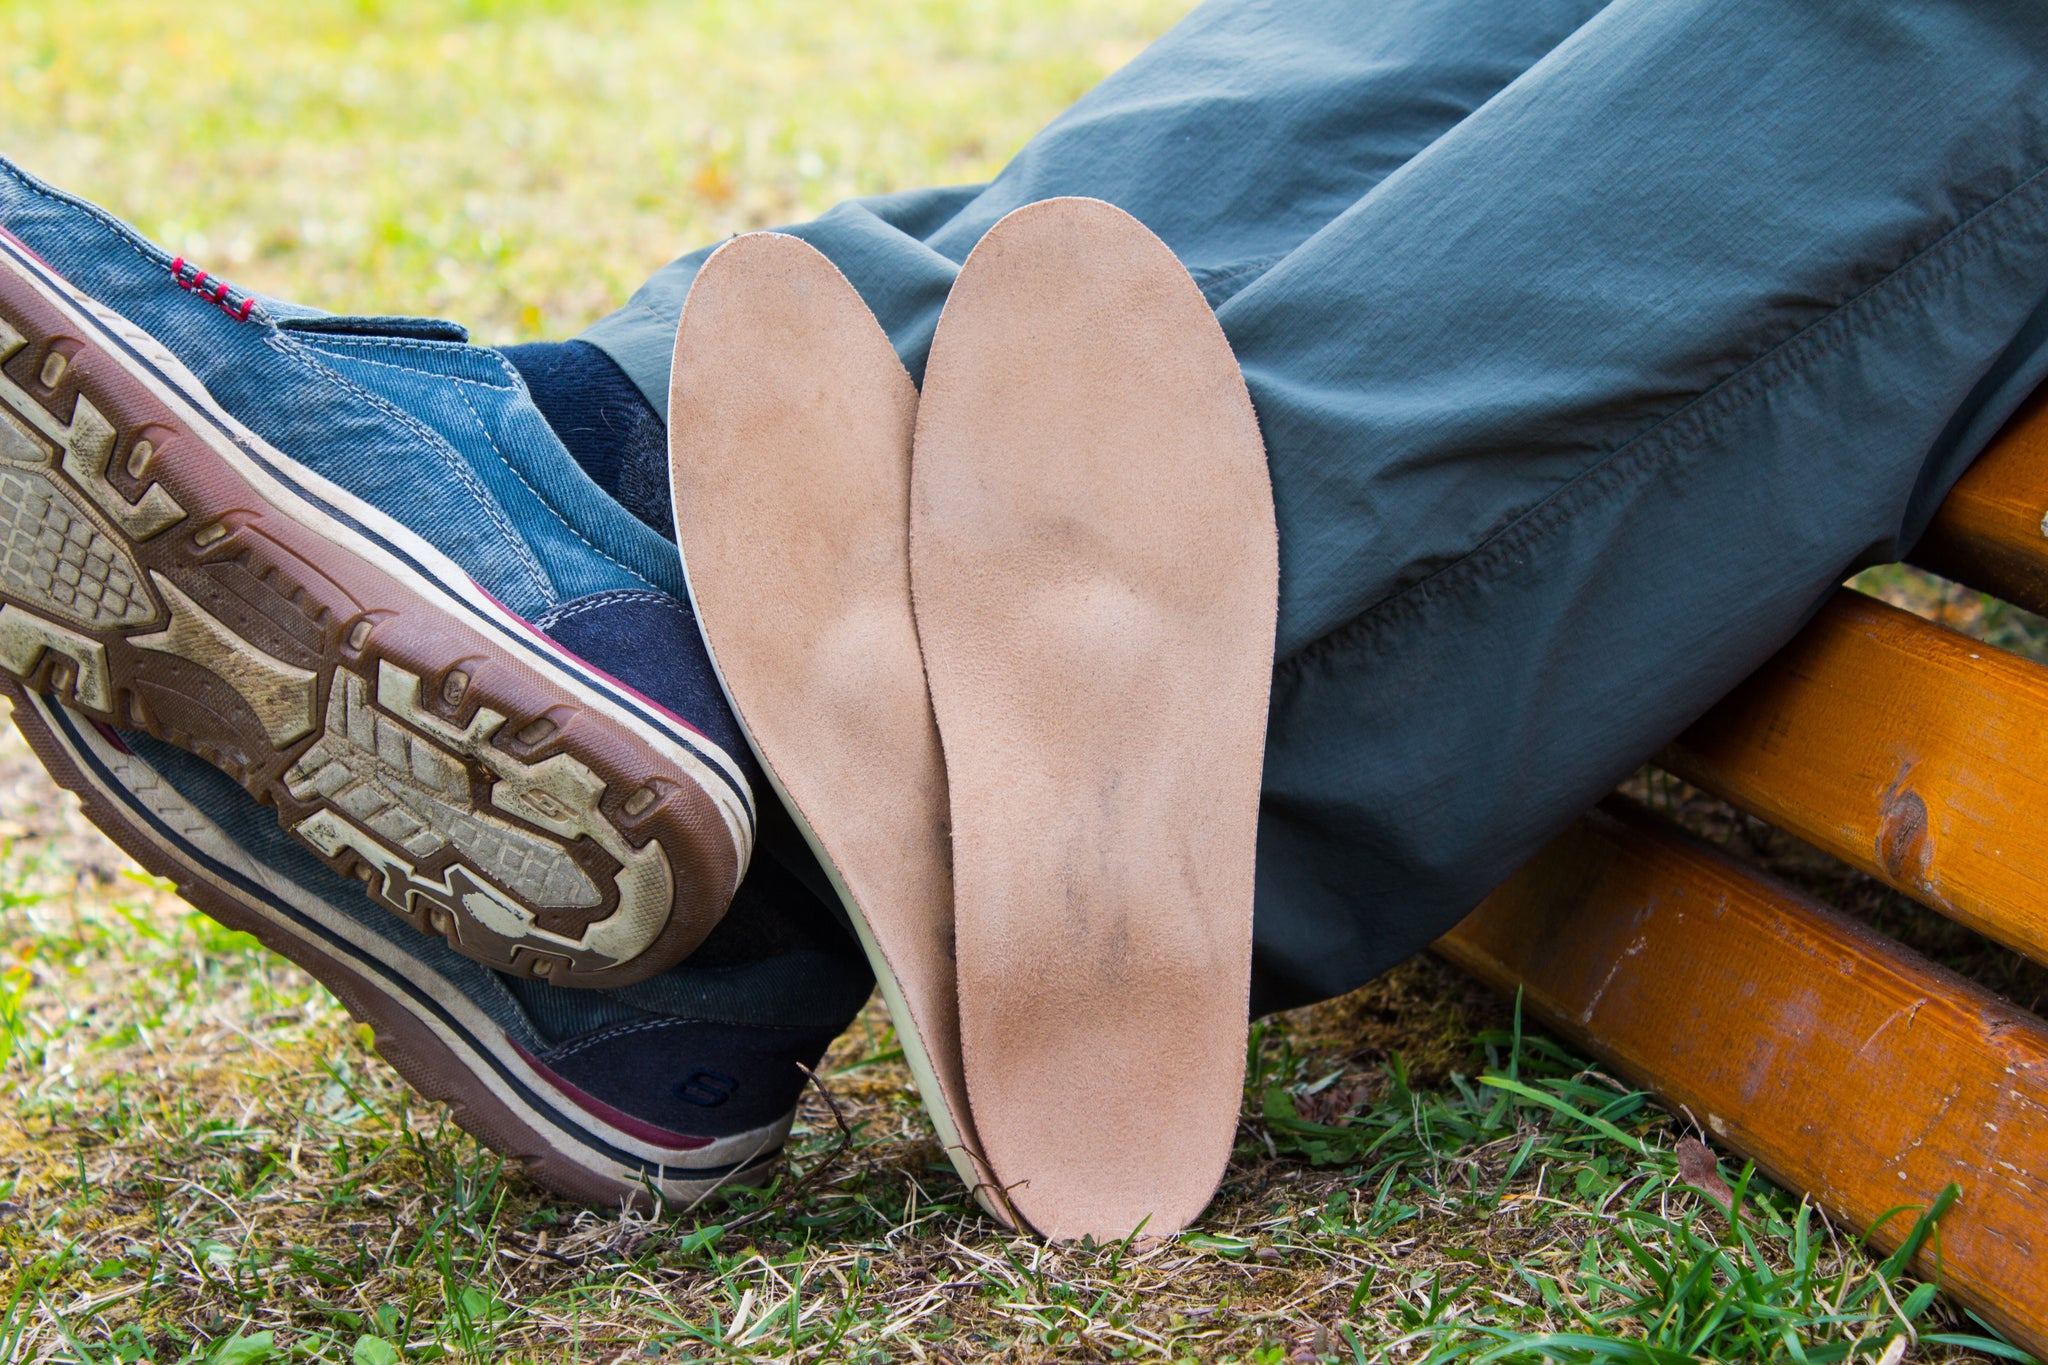 Sole Searching: How You Can Find the Right Insoles for Your Shoes